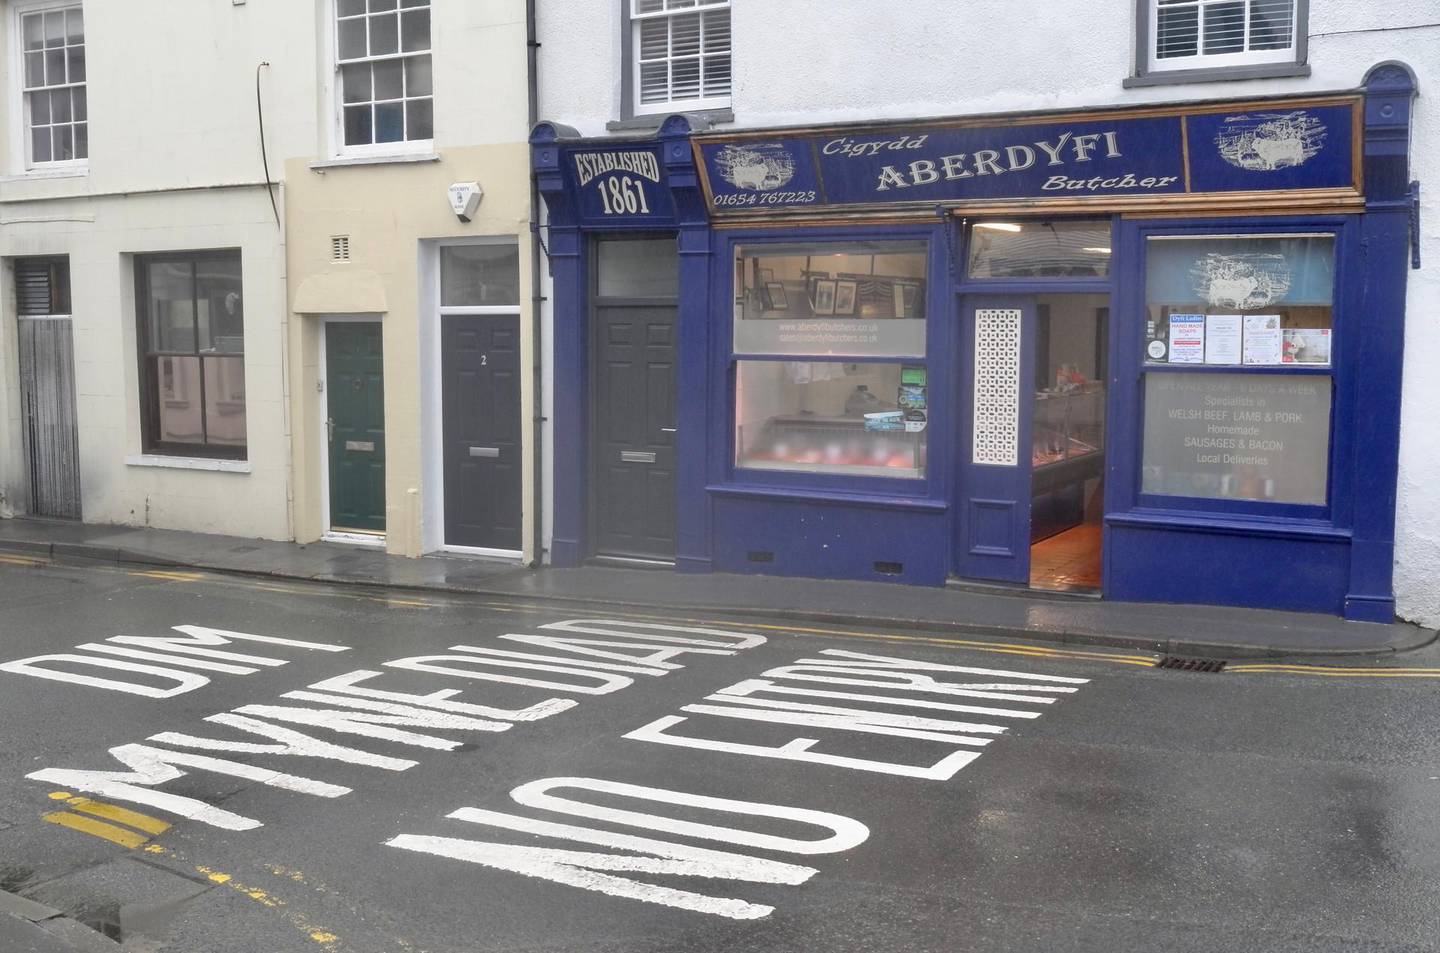 Aberdovey's butcher with Welsh road sign. James Langton for The National